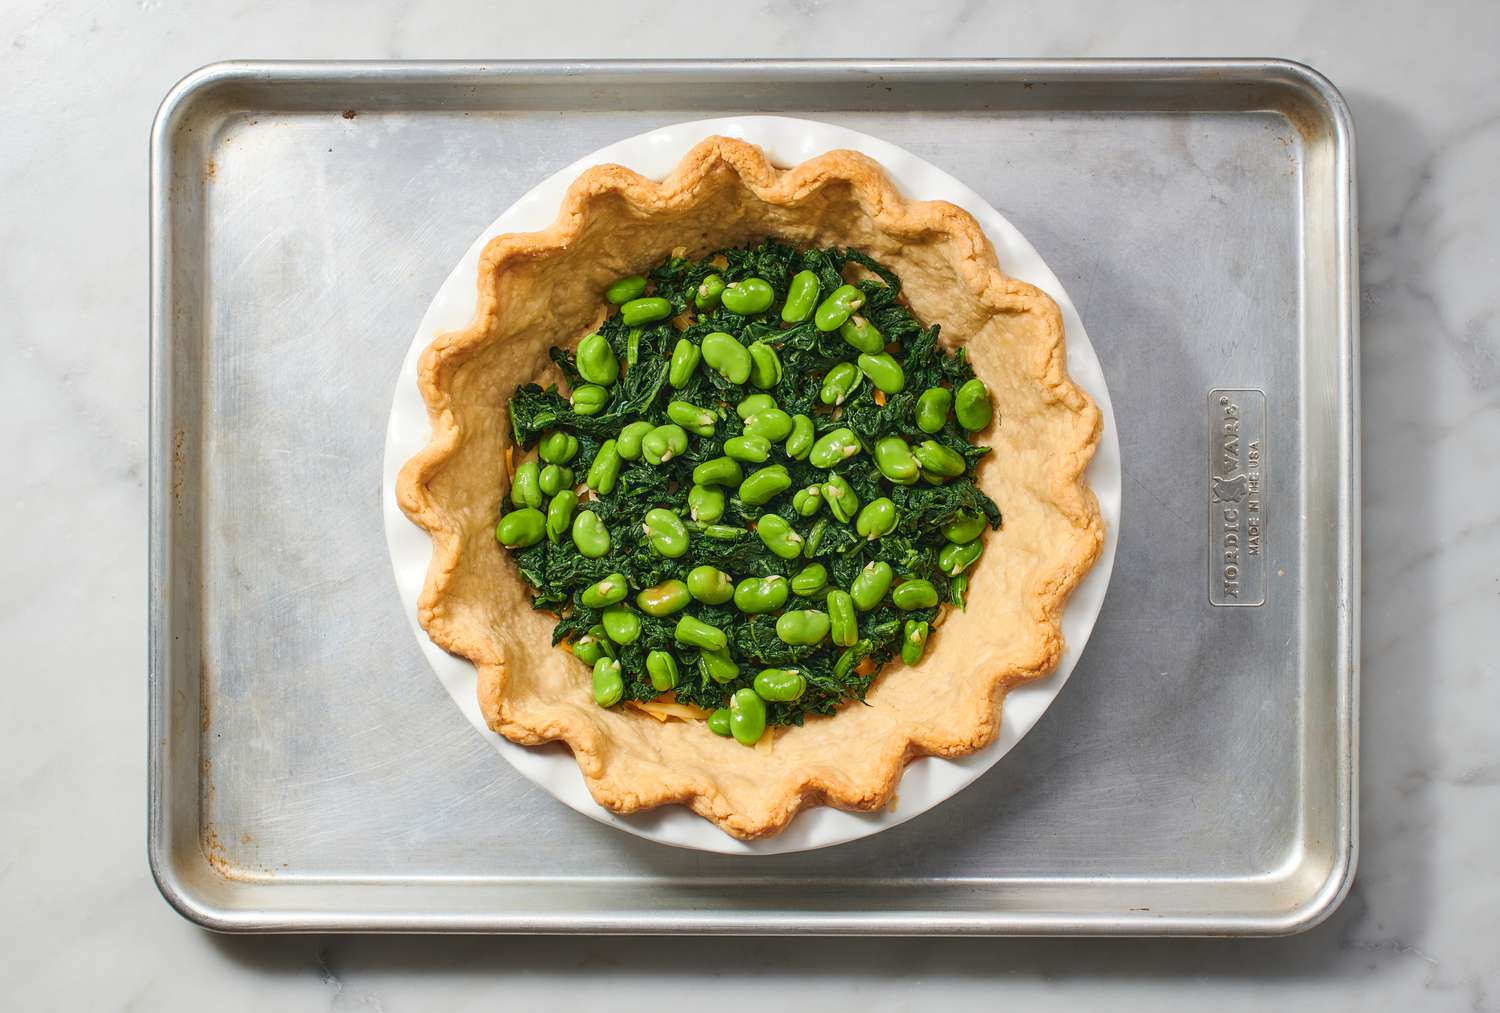 A par-baked pie crust layered with cheese, spinach, and fava beans